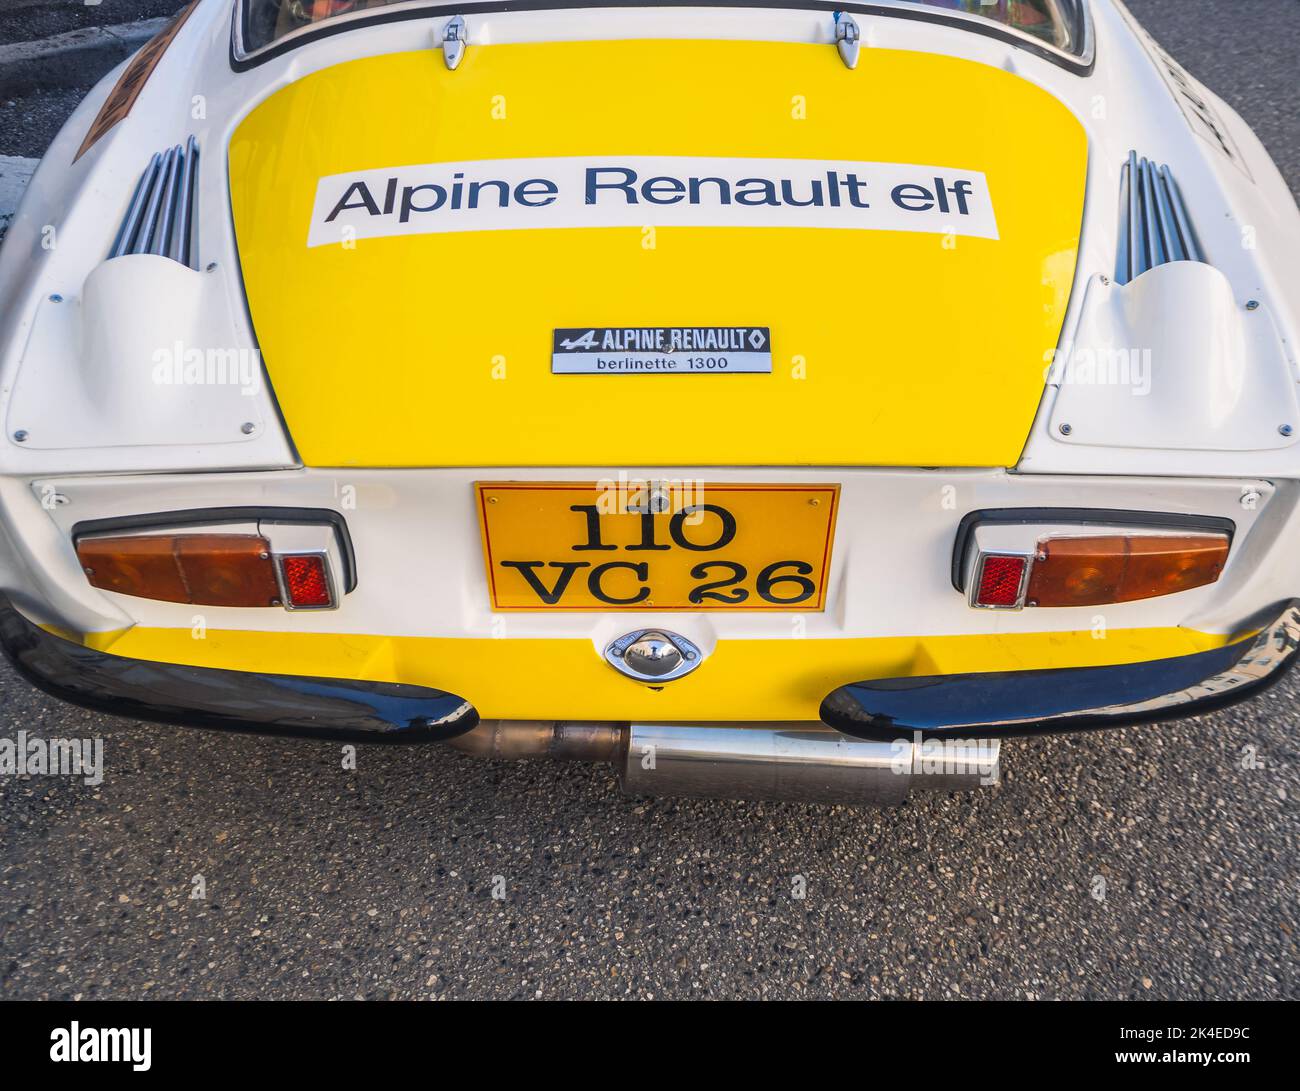 Loriol sur Drome, France - 17 September, 2022: Vintage renault alpine berlinette 1300. Old white and yellow racing car parked on the street Stock Photo